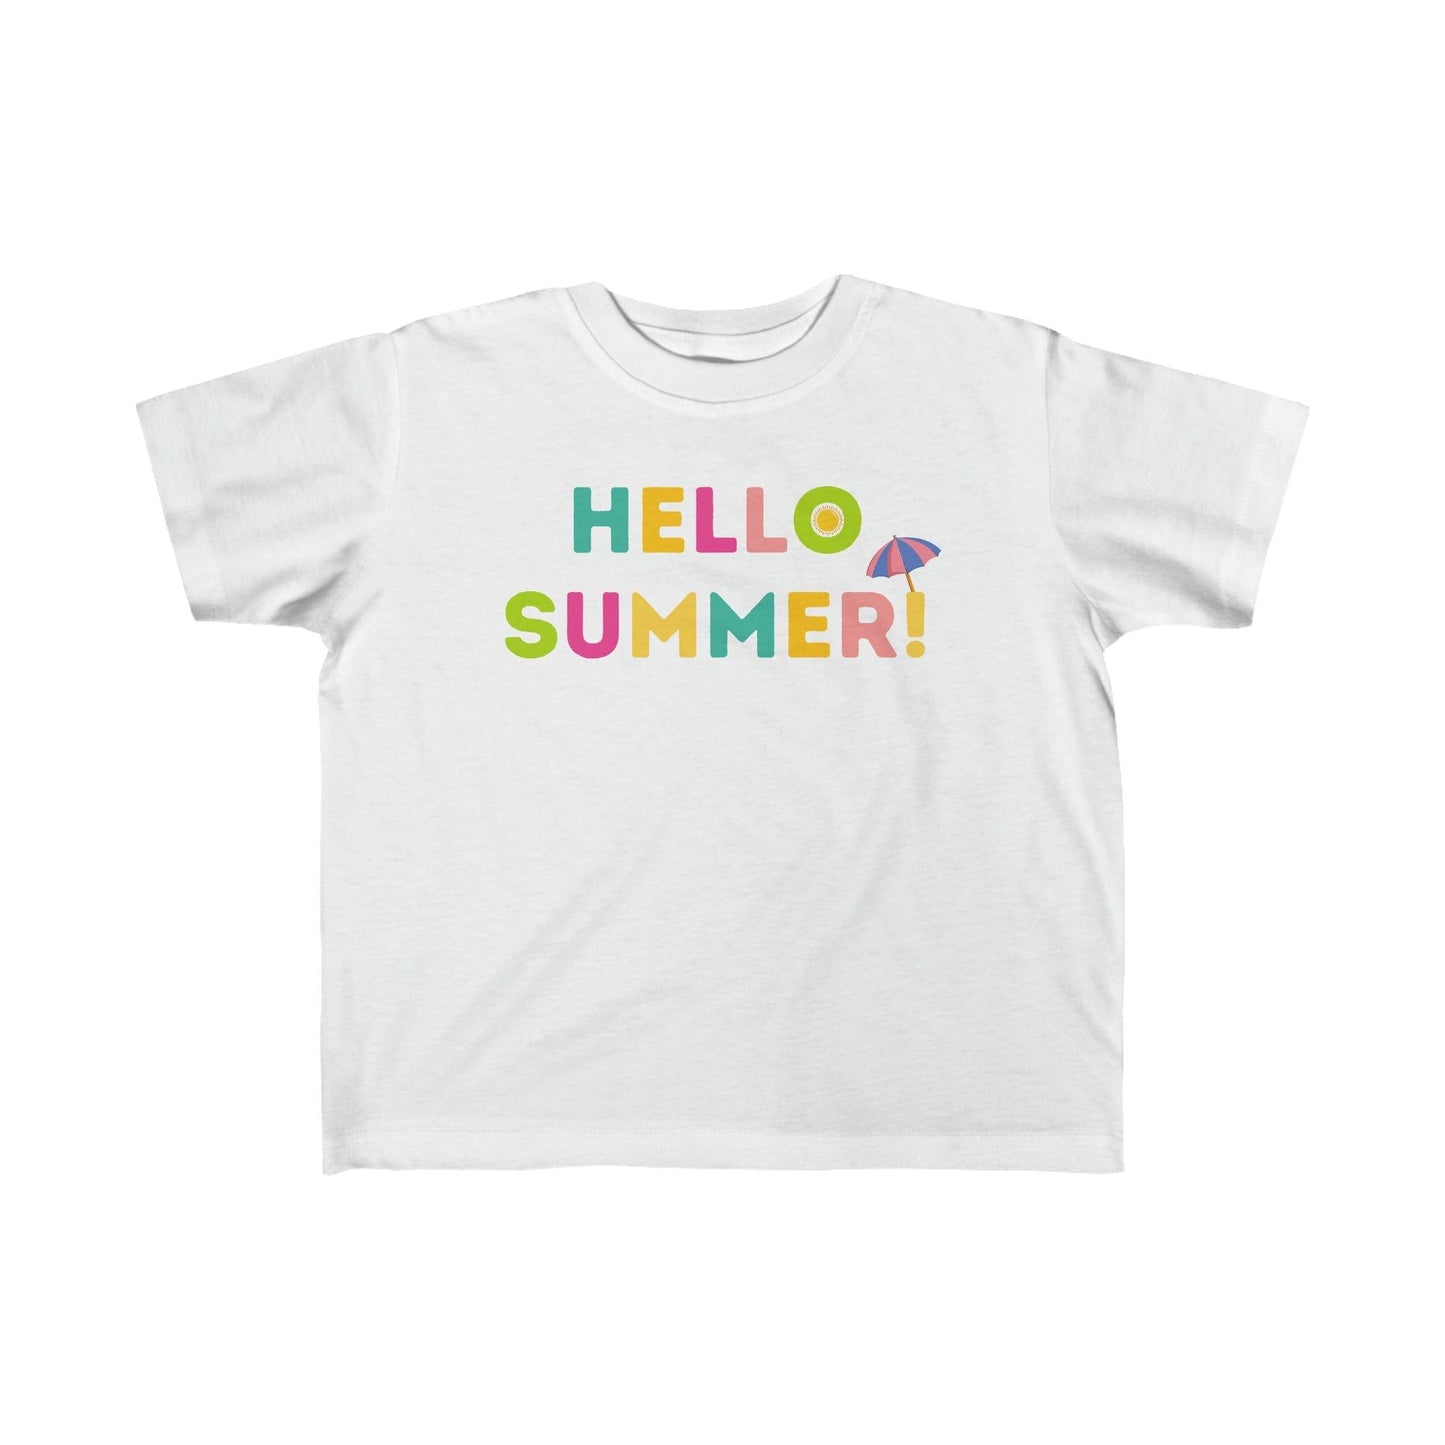 Toddler's Hello Summer Tee, Summer shirt for toddlers birthday gift Kids